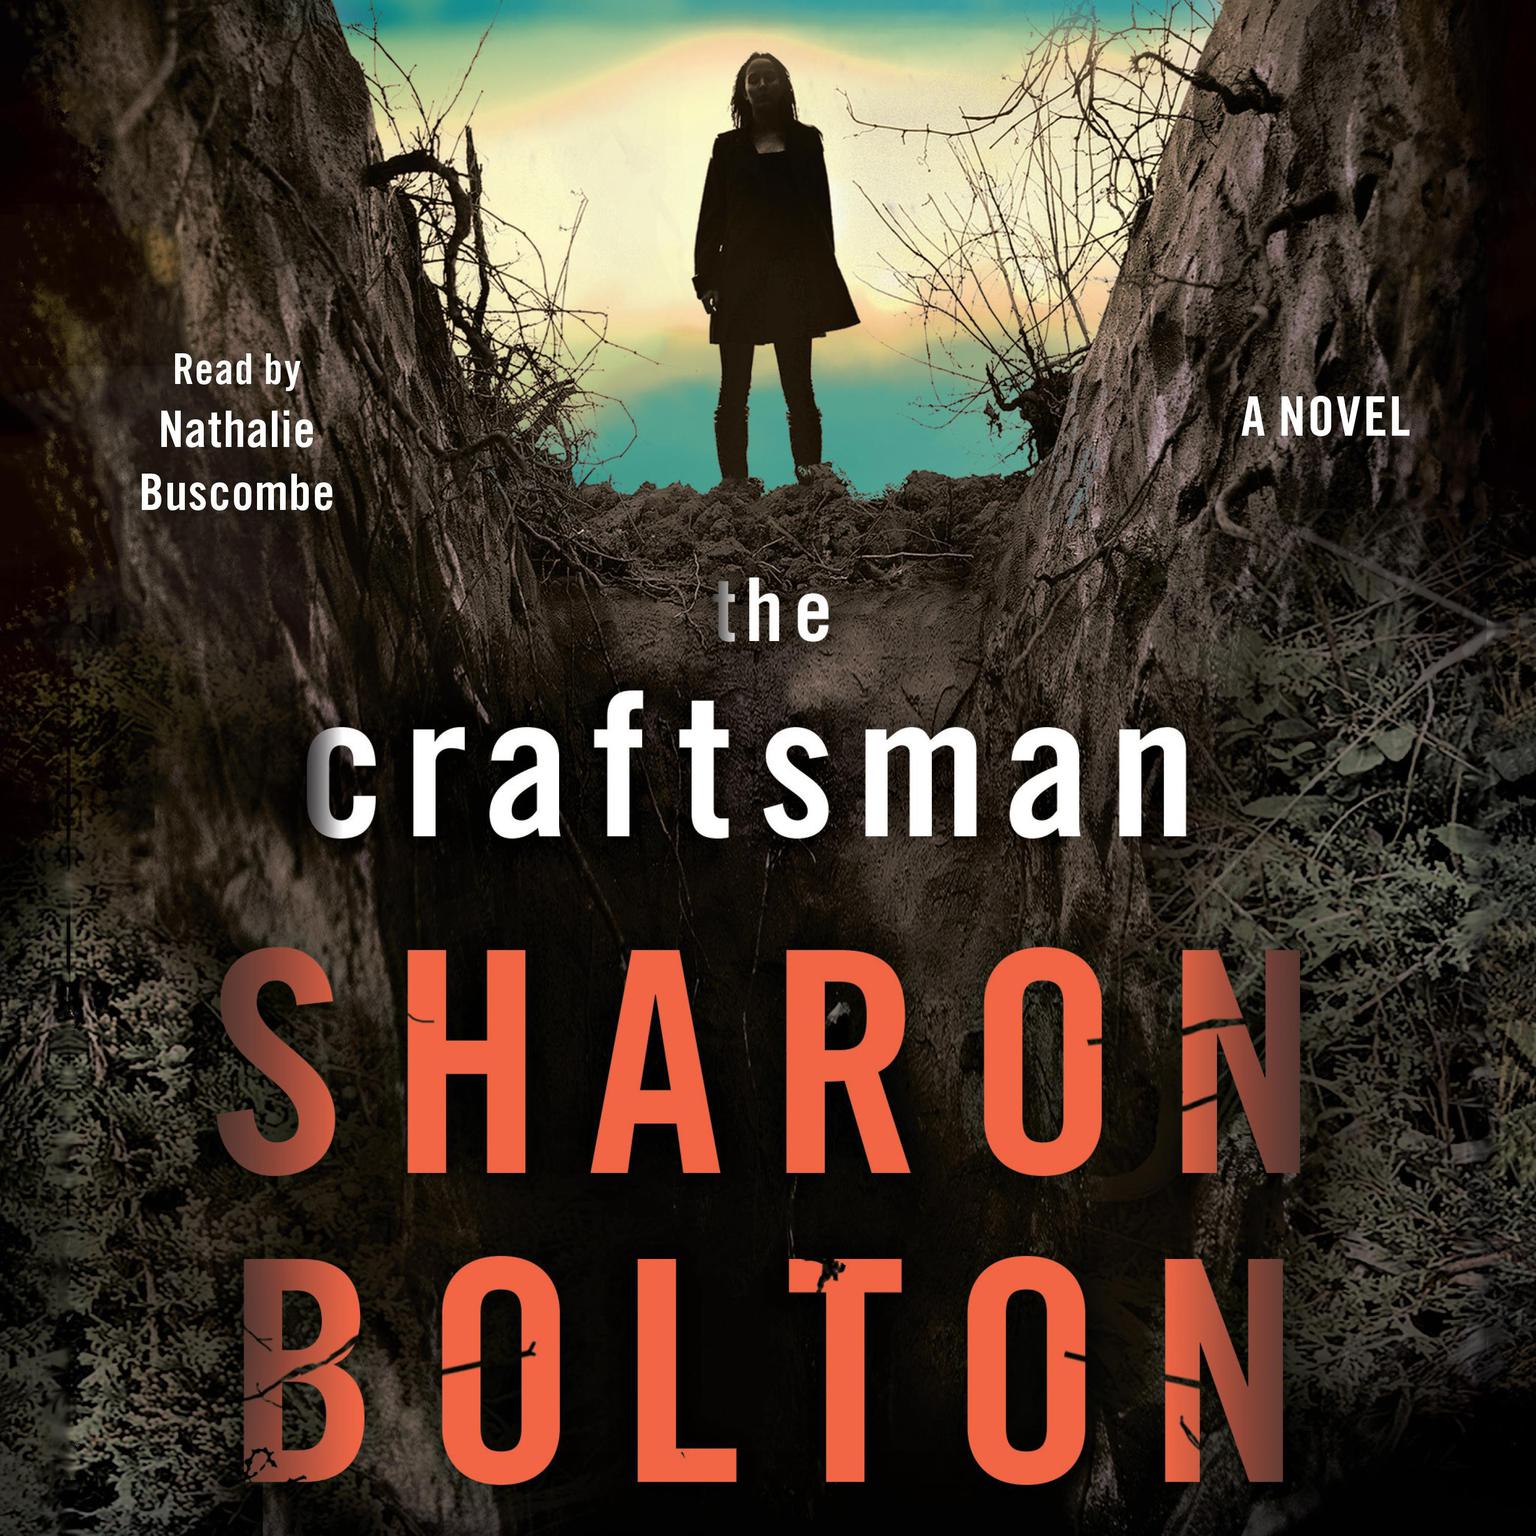 The Craftsman: A Novel Audiobook, by Sharon Bolton